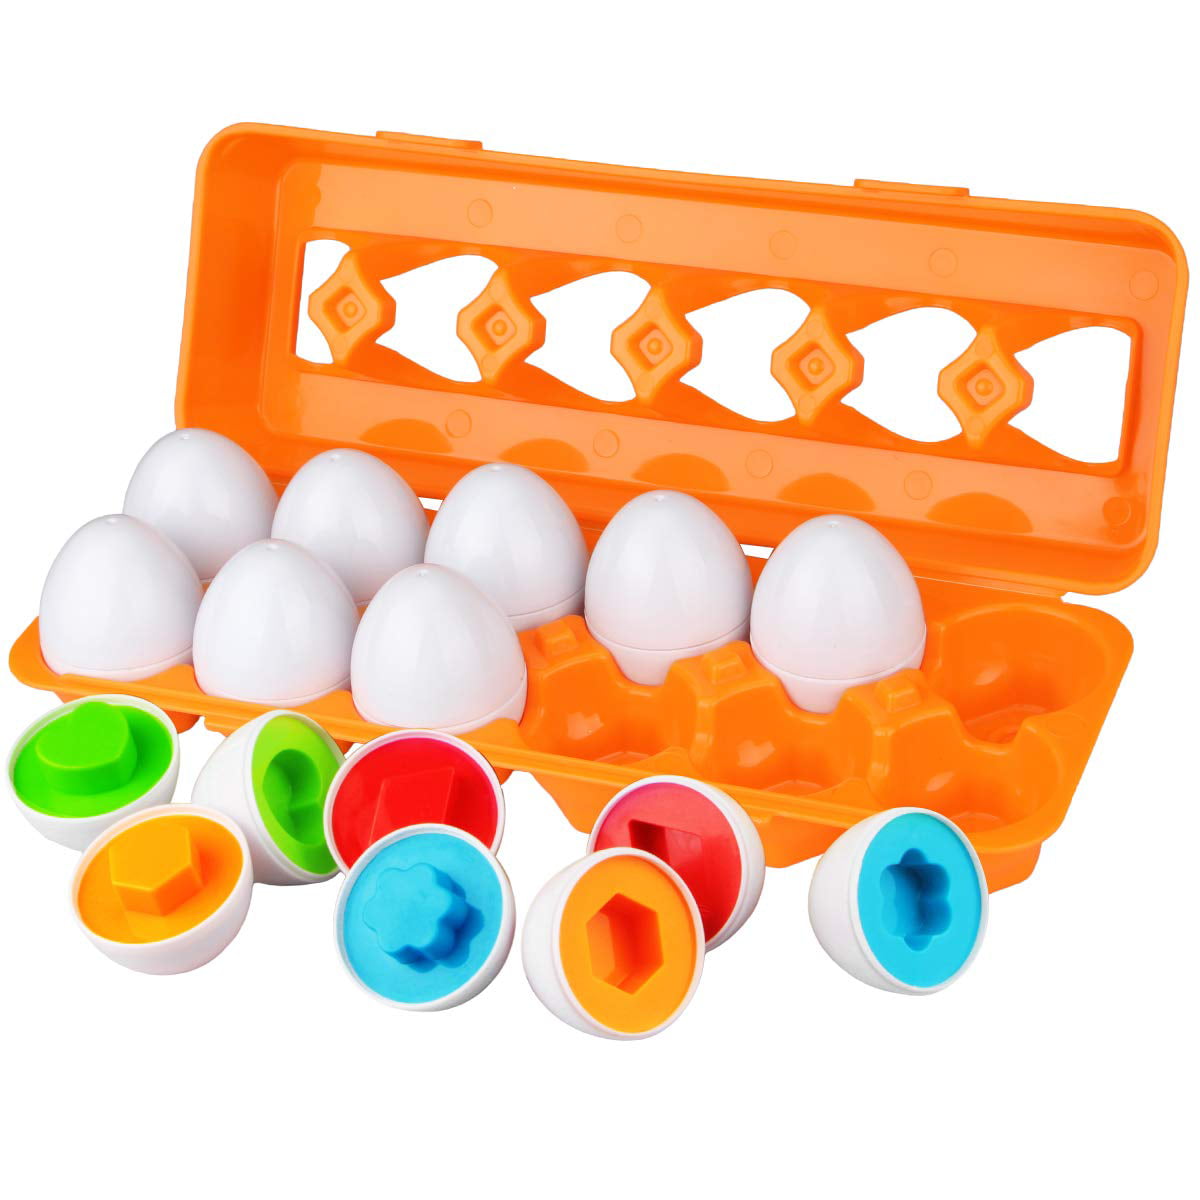 for Age 2 Years Old and 2 Years Up Kid Baby. 12 Eggs for Learn Color & Shape Match Egg Set Educational Color & Recognition Skills Study Toys Toddler Toys Color Shape Matching Egg Set 